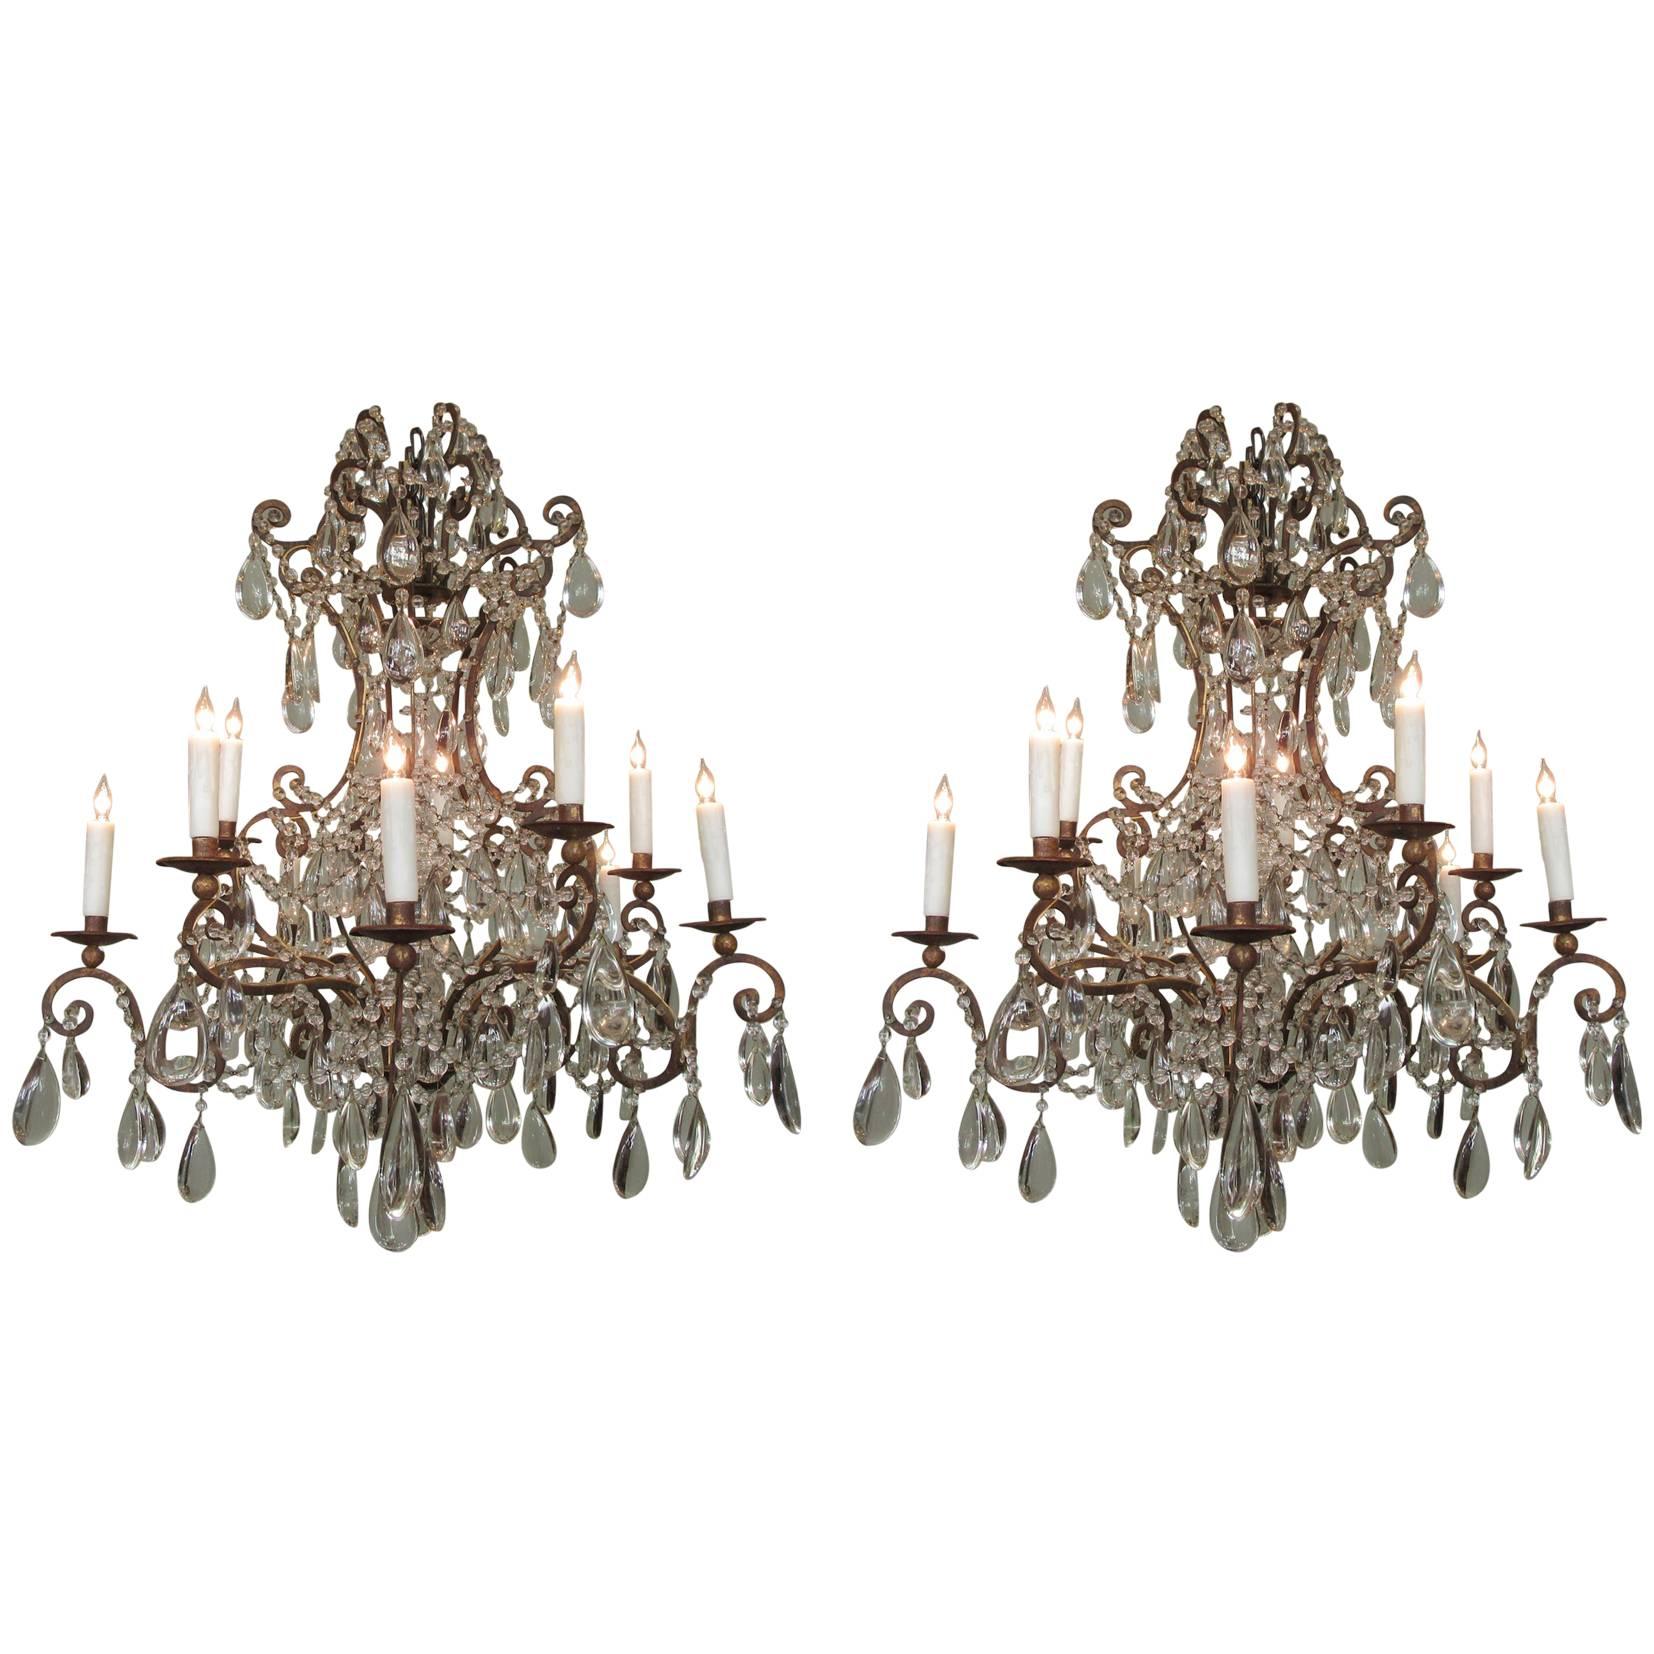 Early 19th Century Italian Gilt Tole and Polished Crystal Pendant Chandeliers